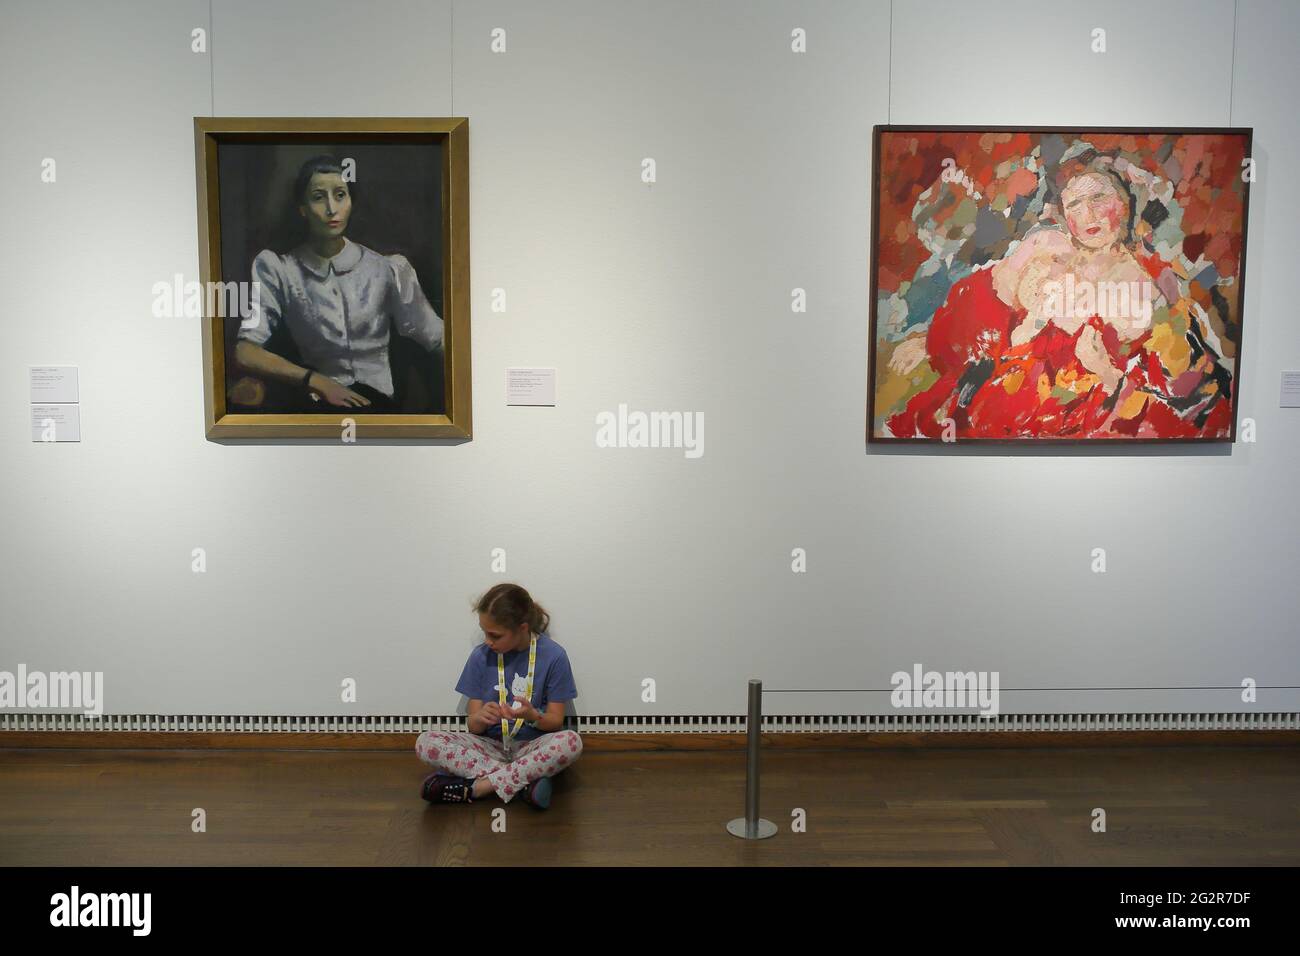 tired young girl taking rest in exhibition hall of Leopold museum Stock Photo